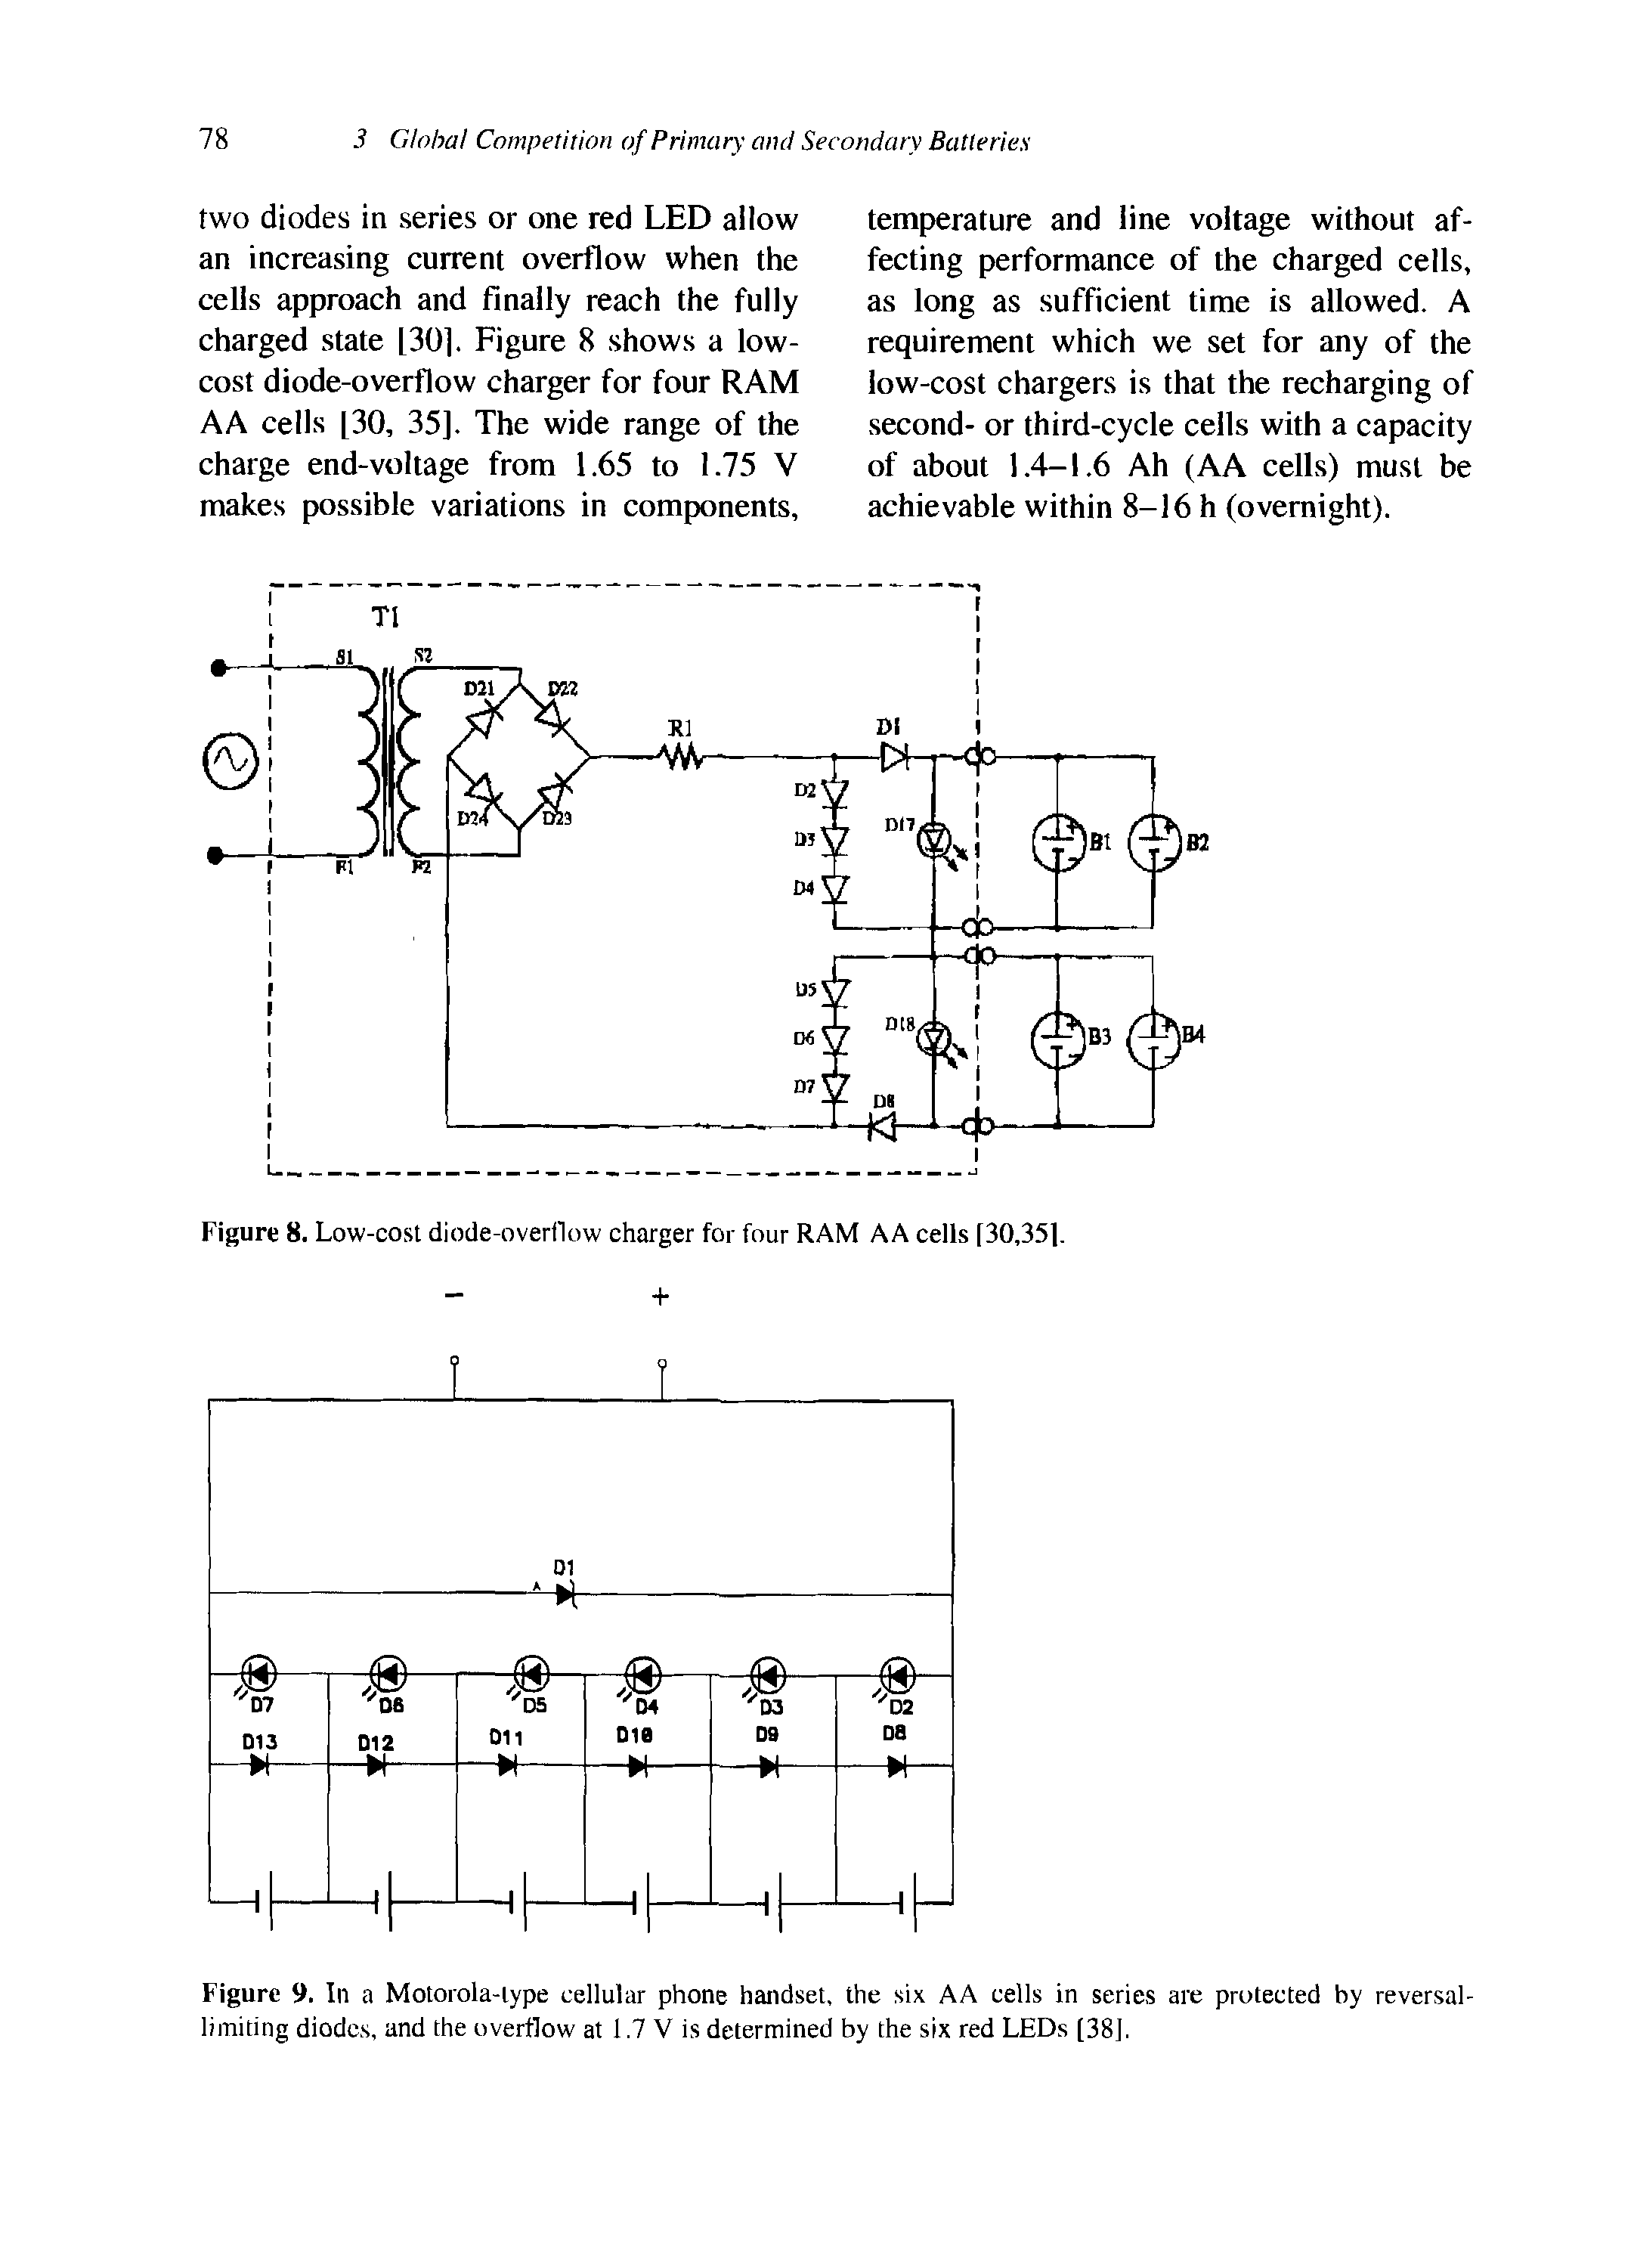 Figure 9. In a Motorola-type cellular phone handset, the six AA cells in series are protected by reversal-limiting diodes, and the overflow at 1.7 V is determined by the six red LEDs [38],...